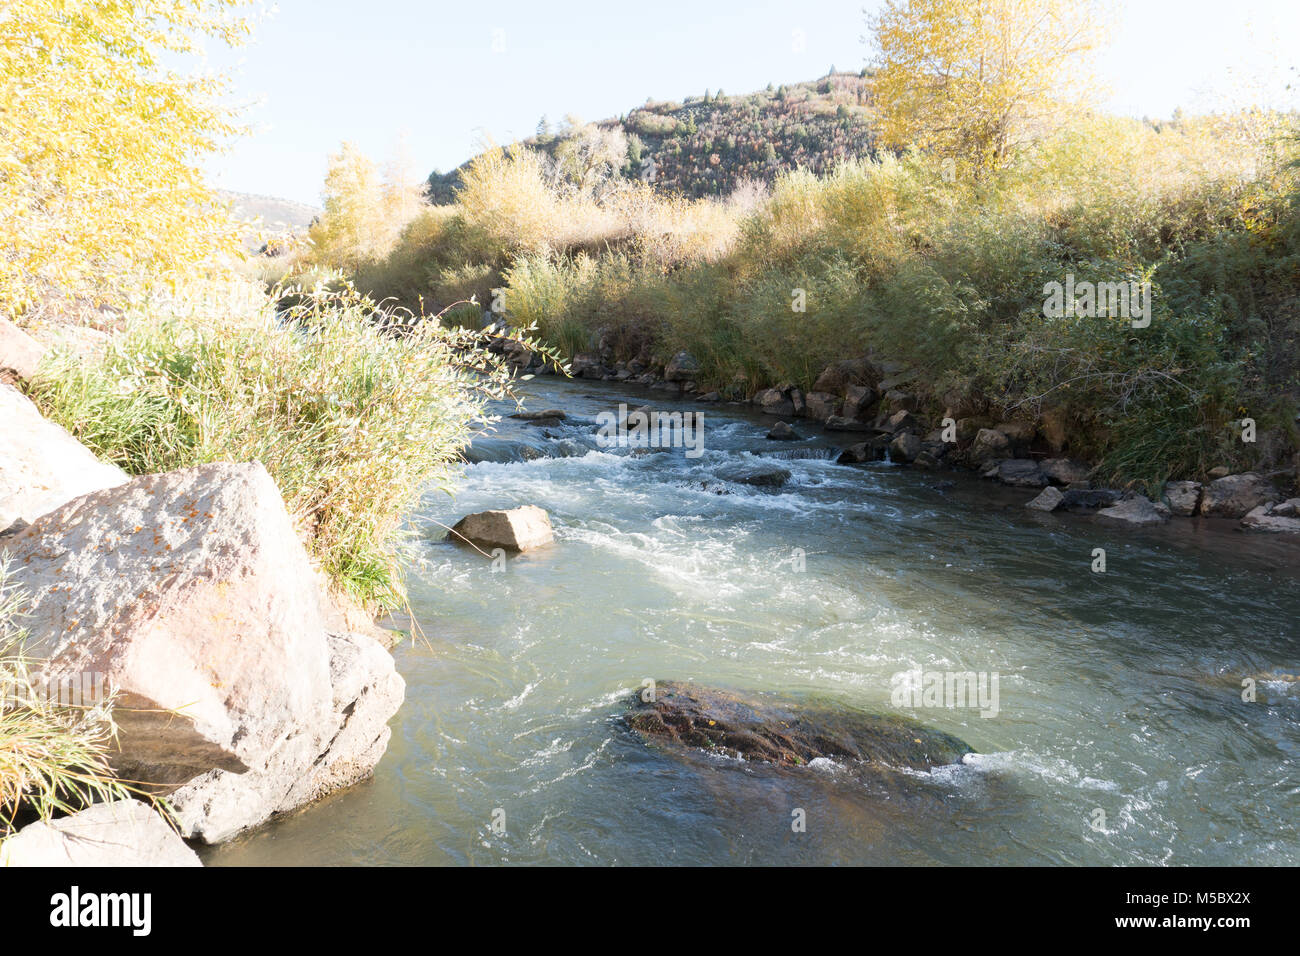 A beautiful flowing river Stock Photo